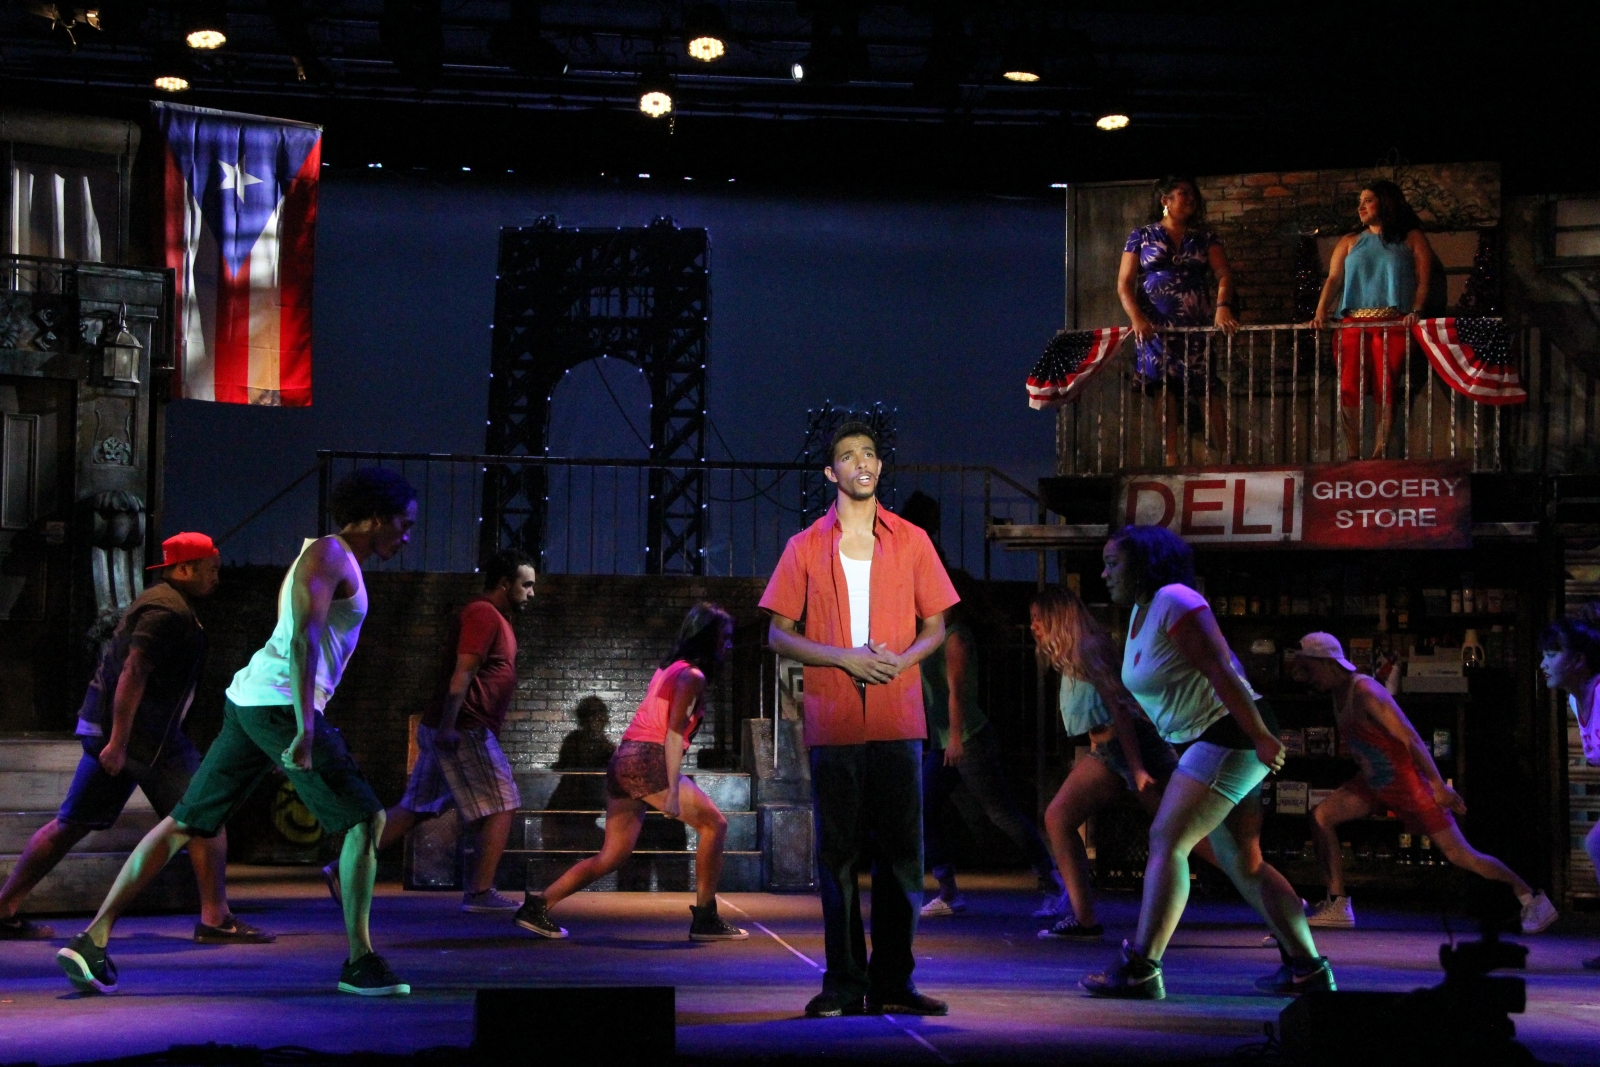 4Wall Donates Lighting for “In the Heights” Show at Super Summer